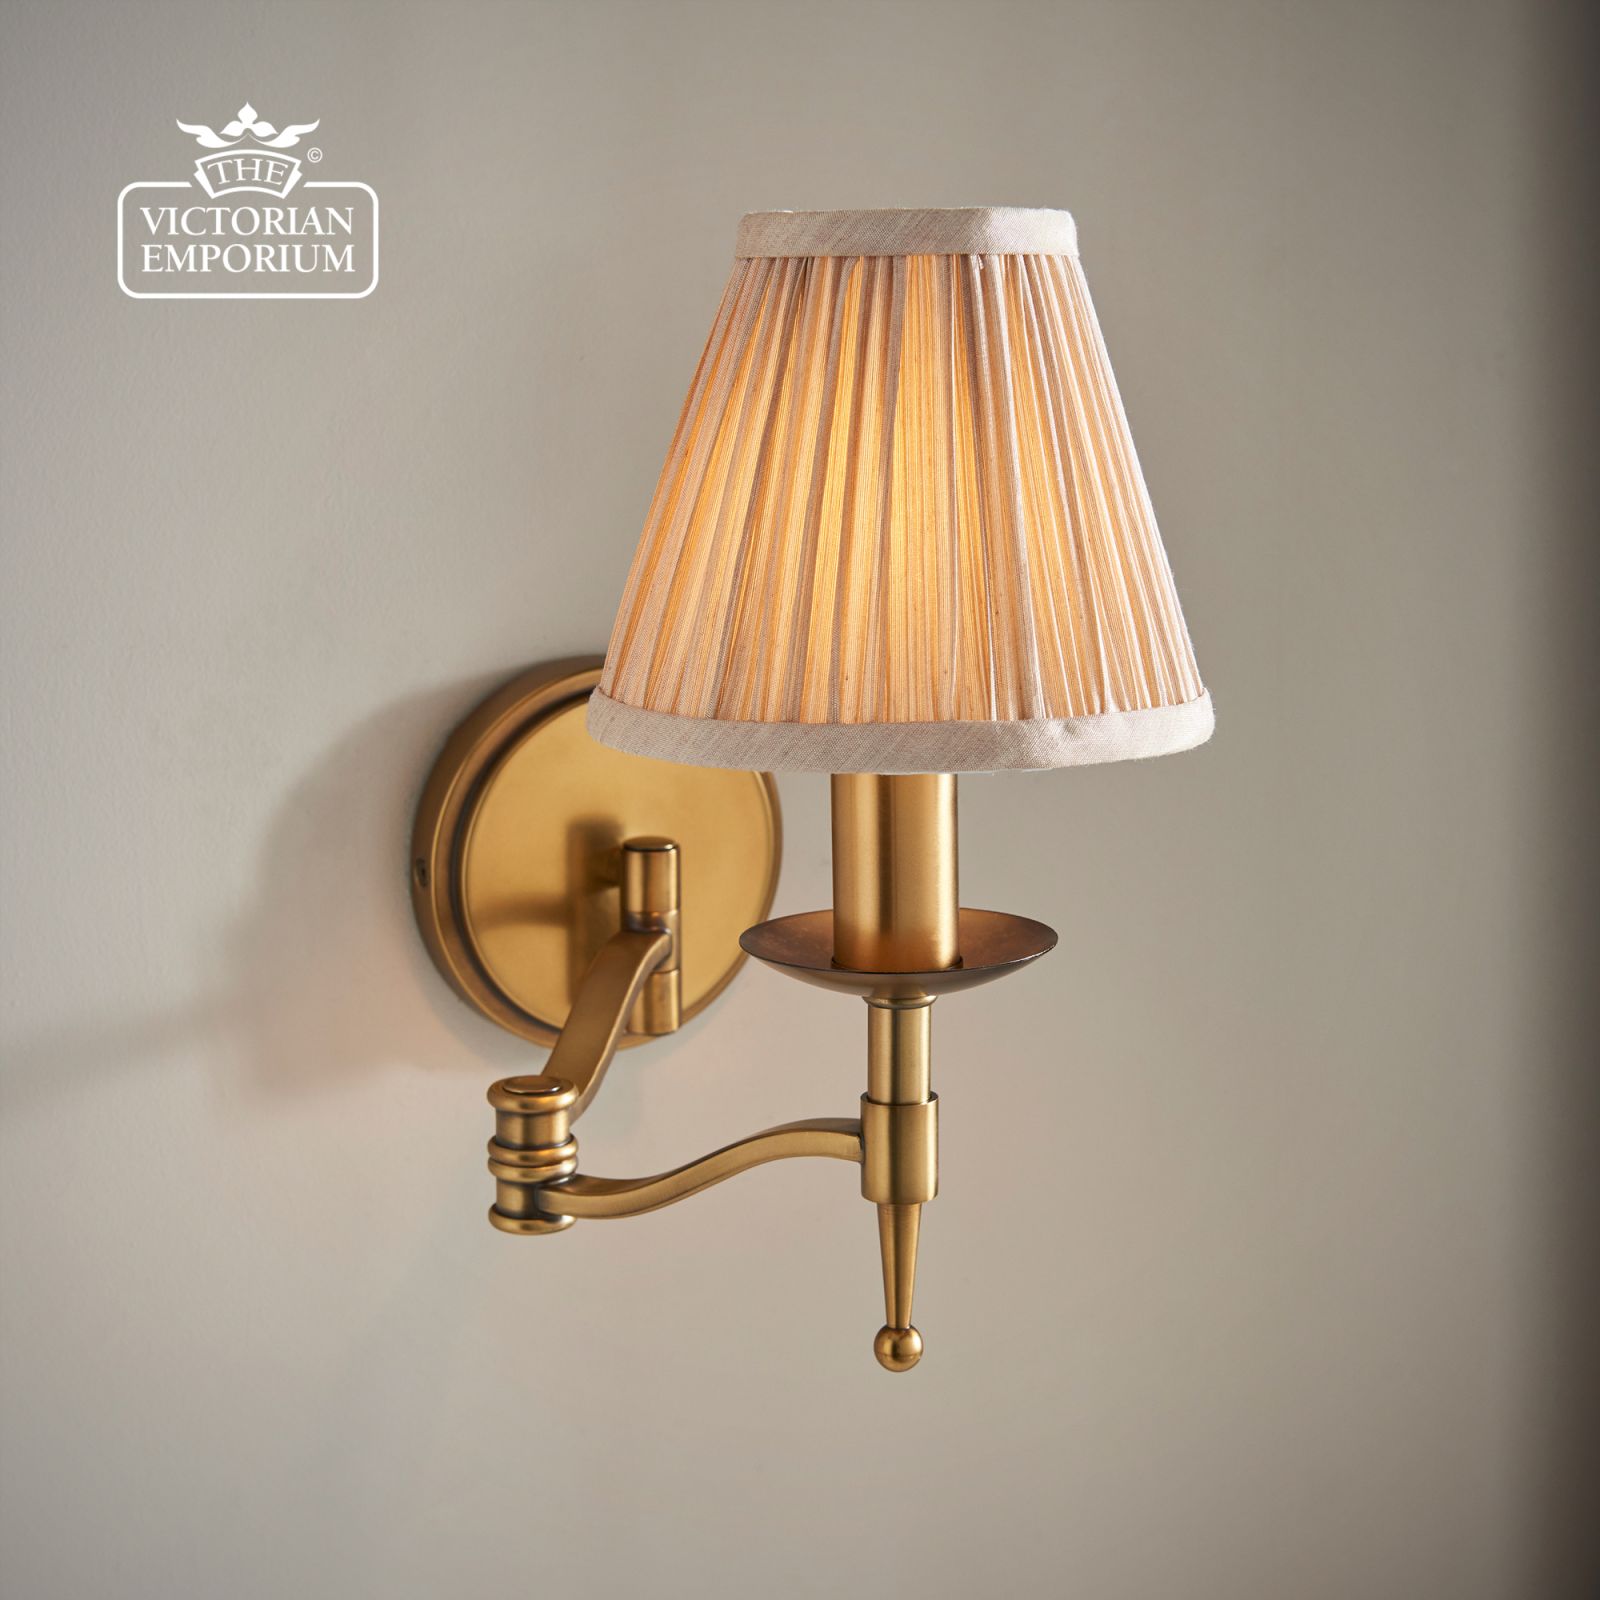 Stanford antique brass Swing arm wall light with beige shade